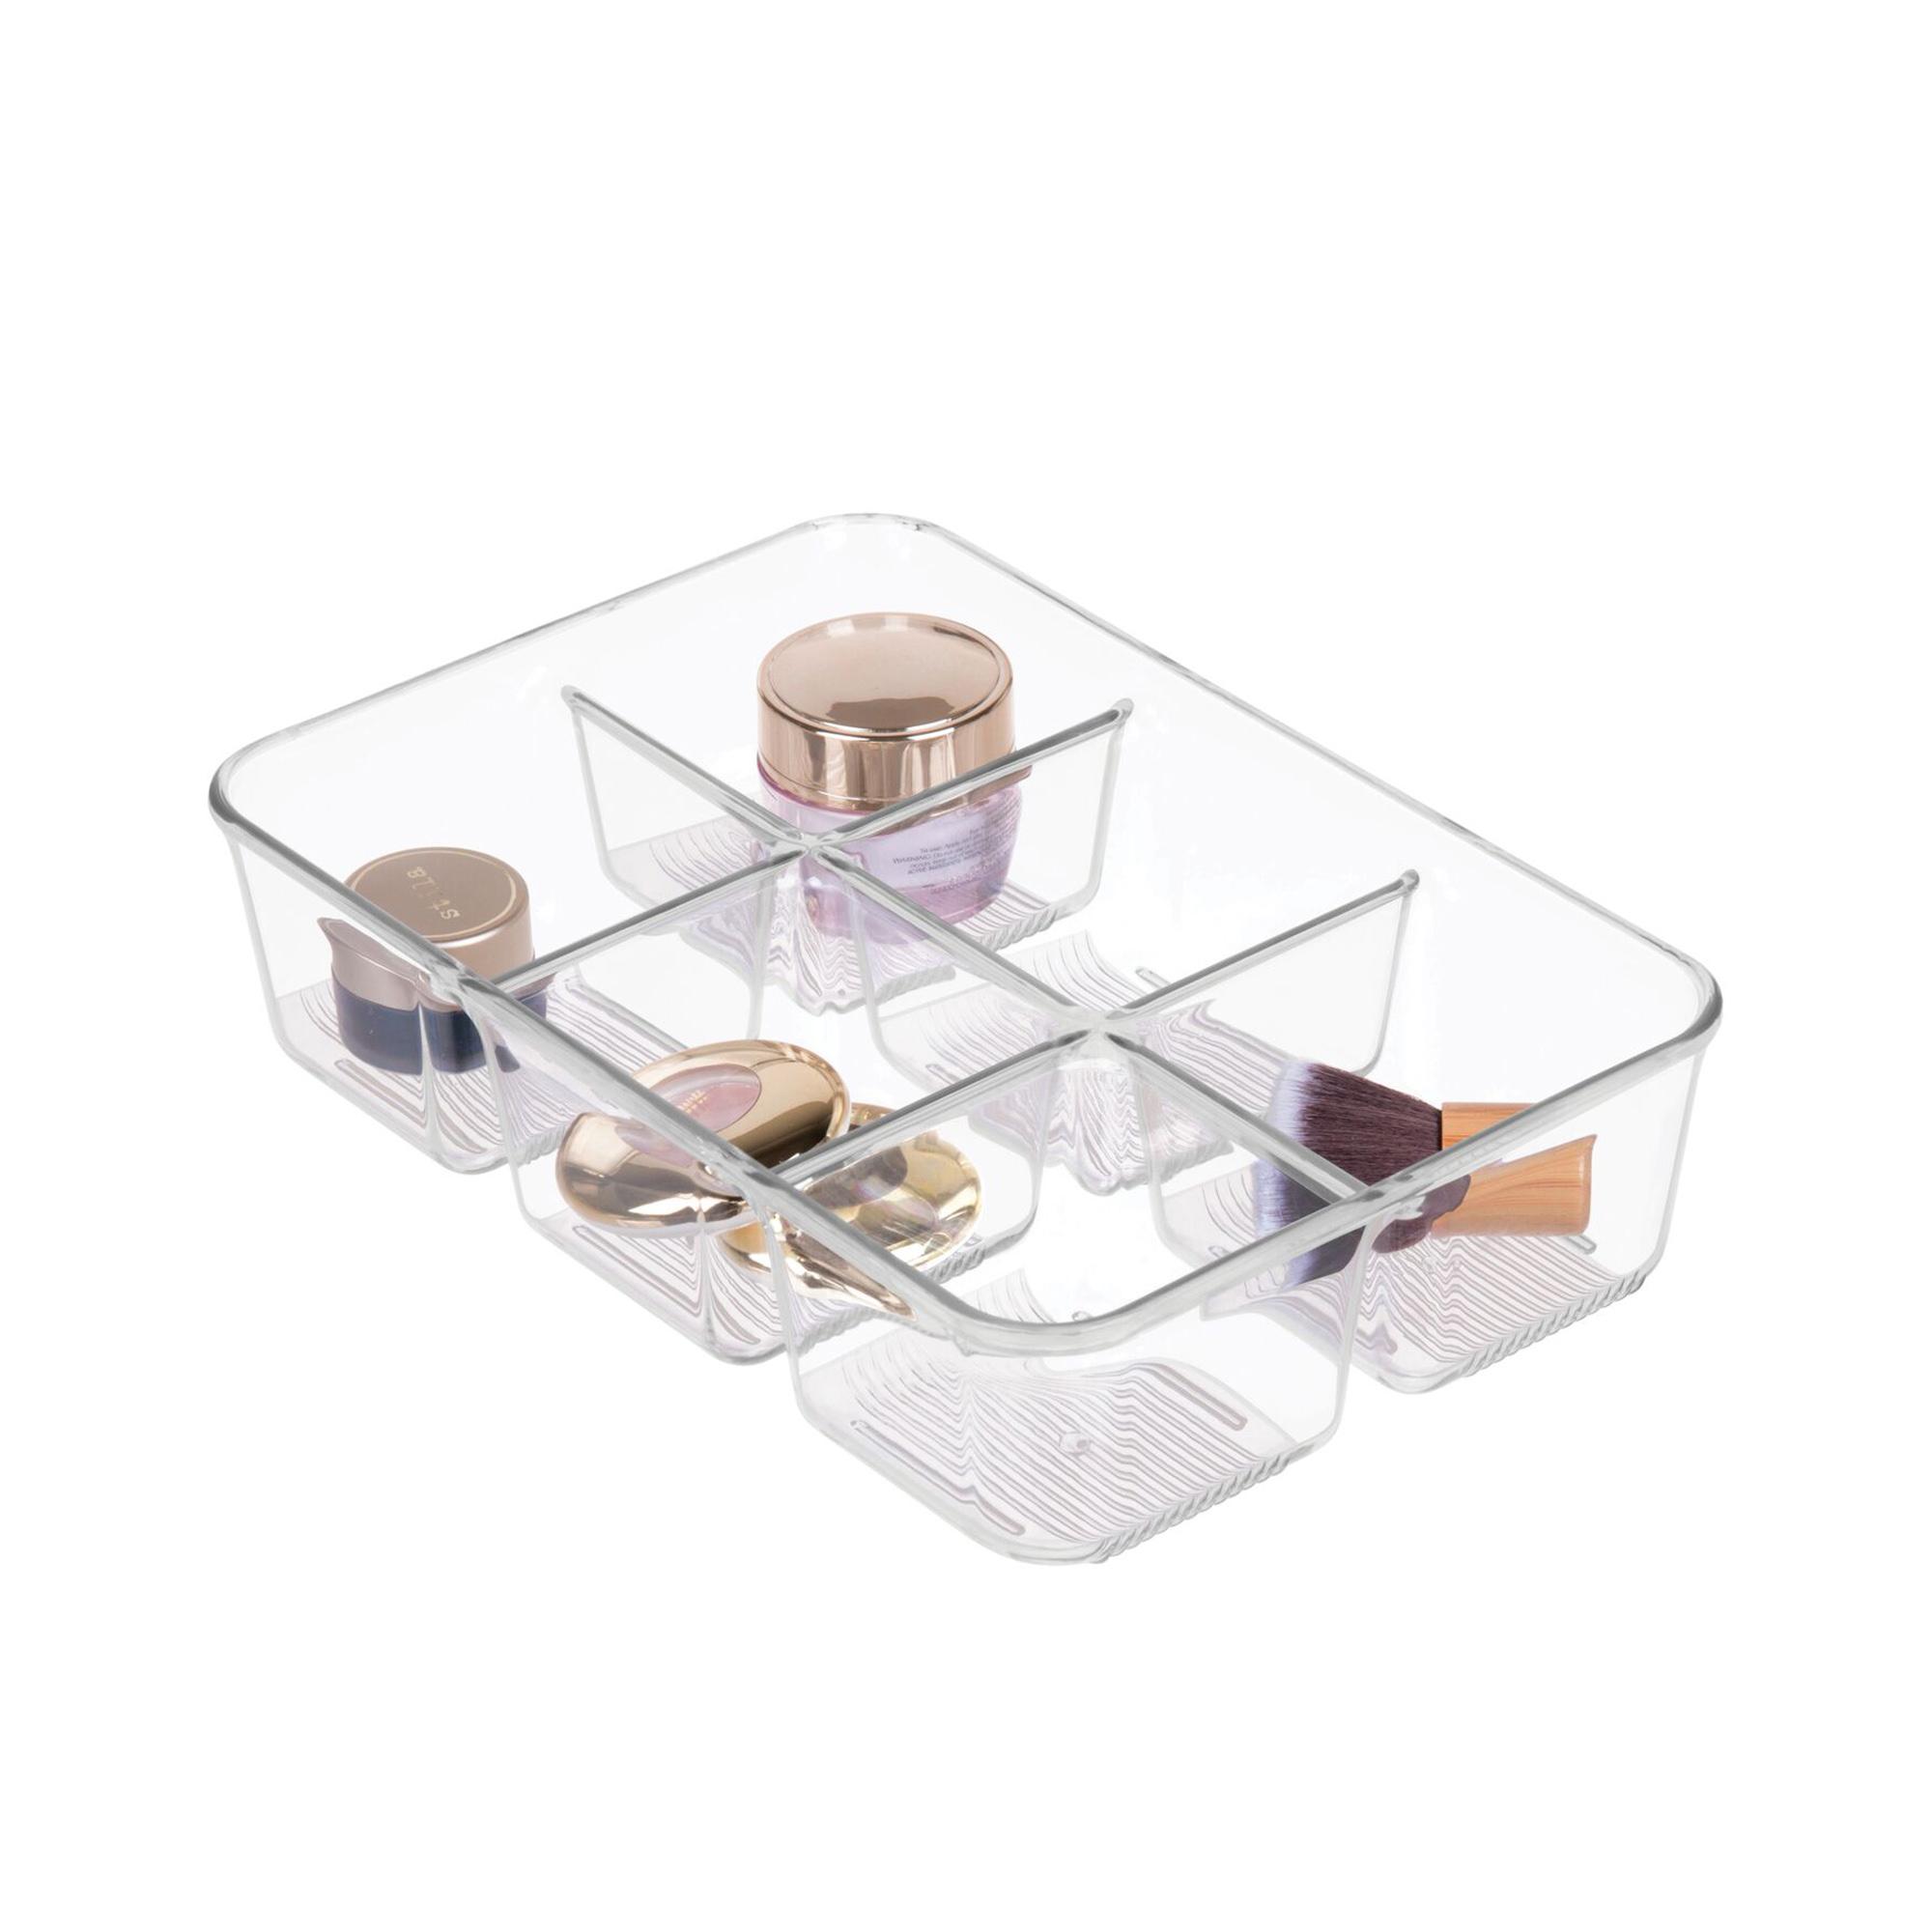 iDesign Linus Pack Organiser 6 Compartment Clear Image 5